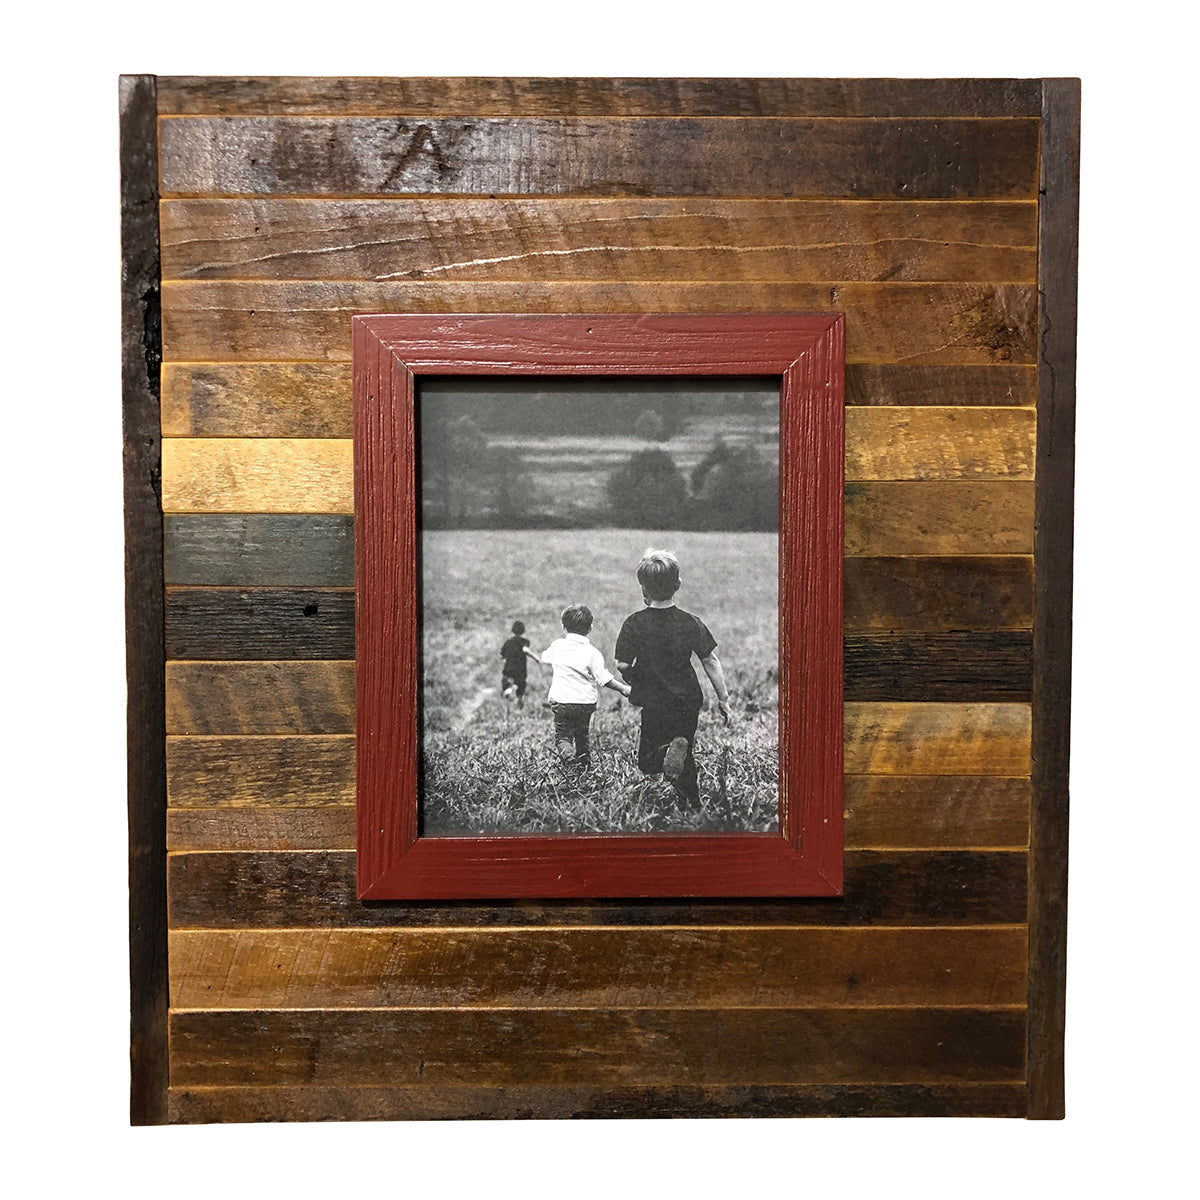 Raised Frame on Reclaimed Wood, Barn Red on Wood, 22" x 20" - Rustic Red Door Co.